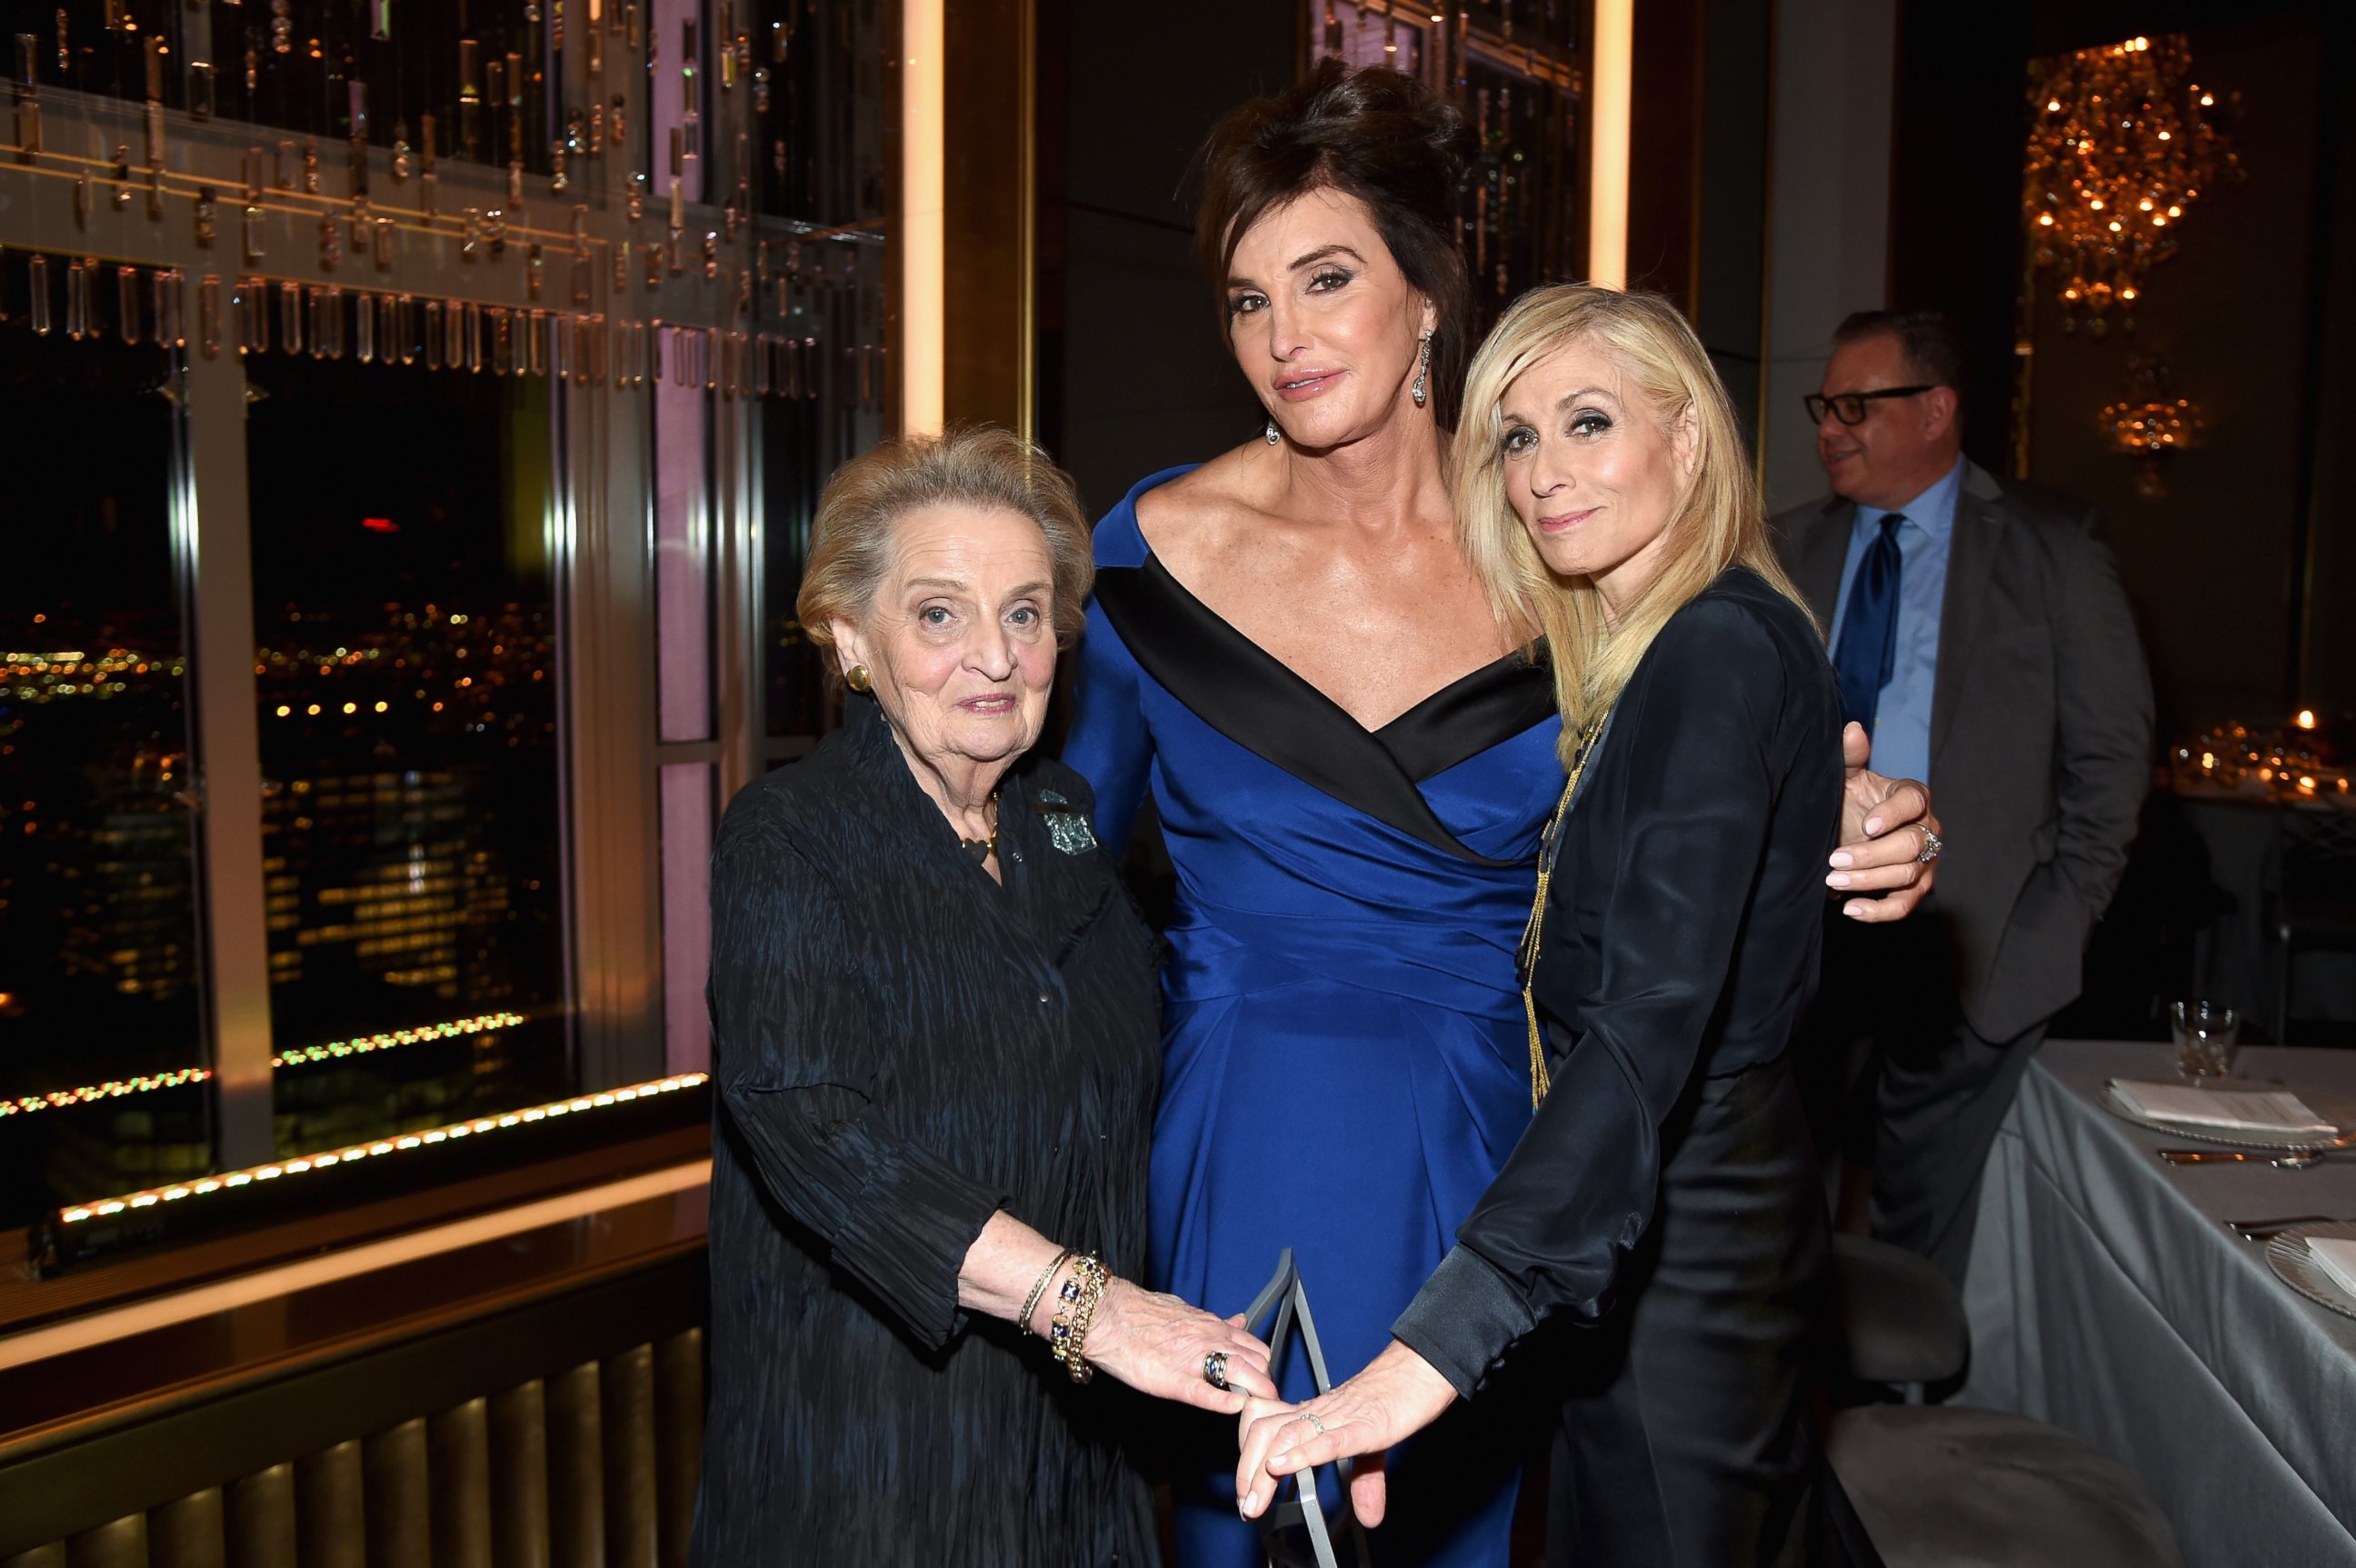 PHOTO: Madeline Albright, Caitlyn Jenner and Judith Light attend the 2015 Glamour Women of The Year Awards dinner hosted by Cindi Leive at The Rainbow Room, Nov. 9, 2015 in New York.  